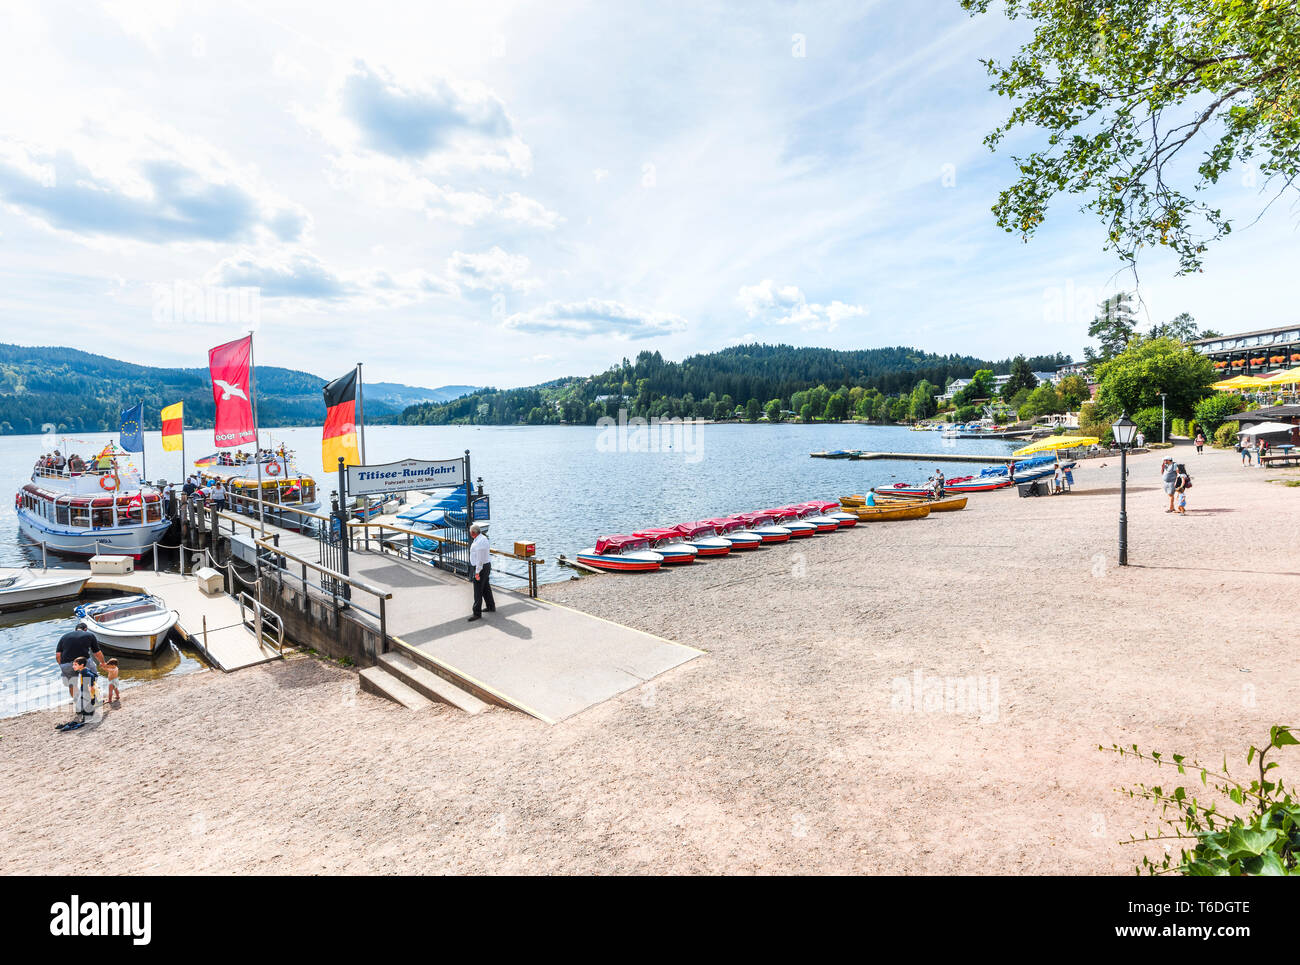 excursion boats at the lake Titisee, High Black Forest, Germany, shore of town Titisee-Neustadt Stock Photo